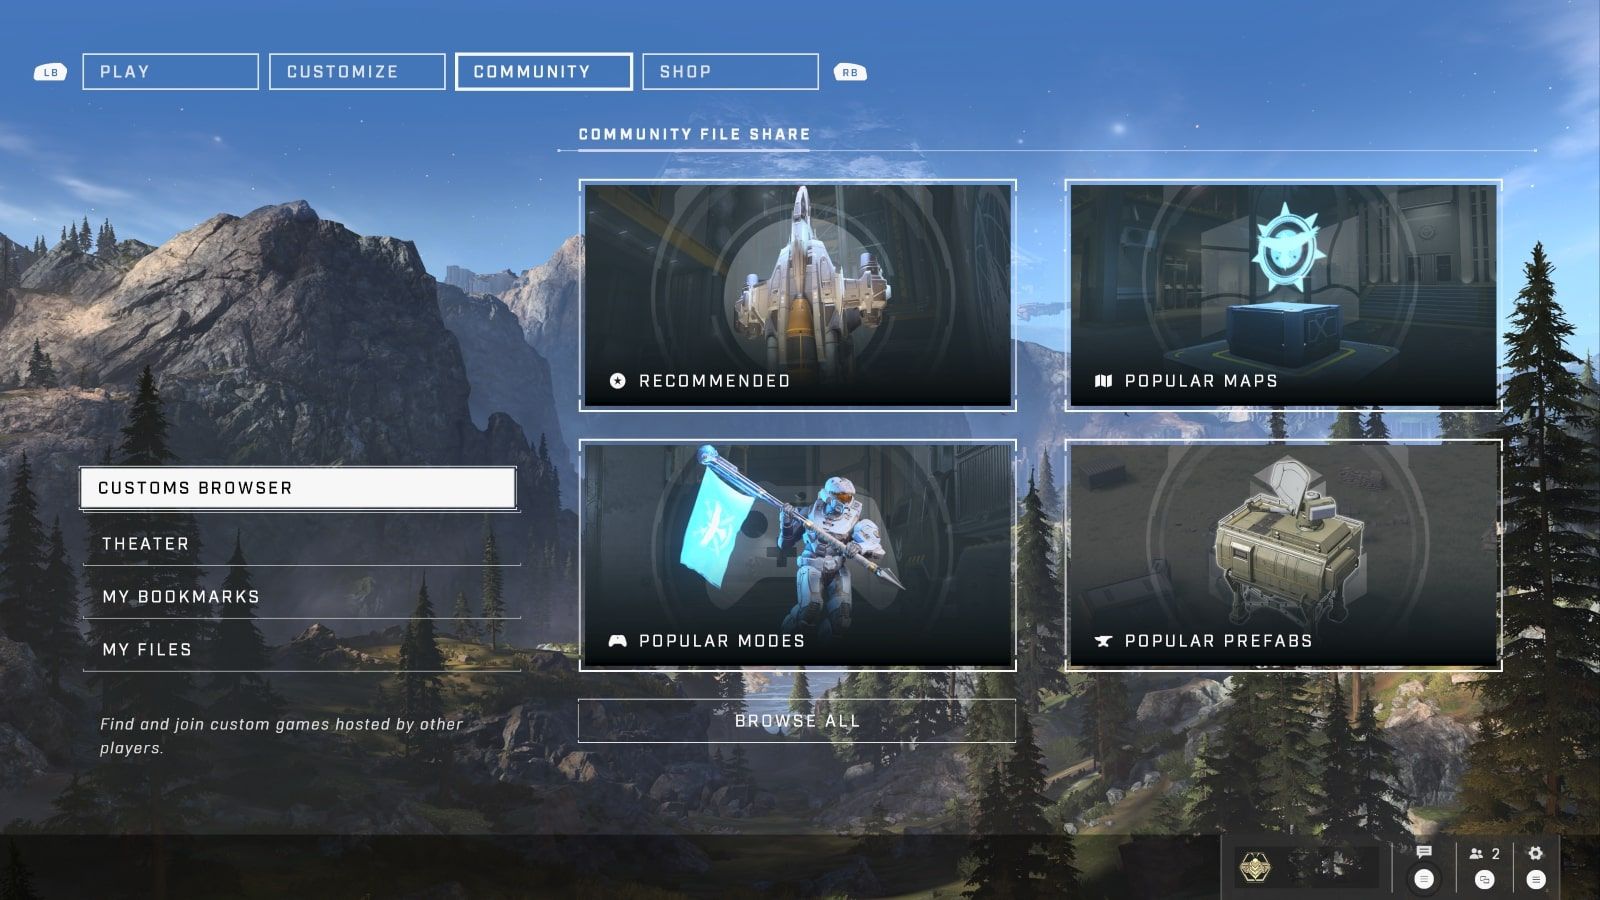 A screenshot of the Halo Infinite main menu with the Community options highlighted